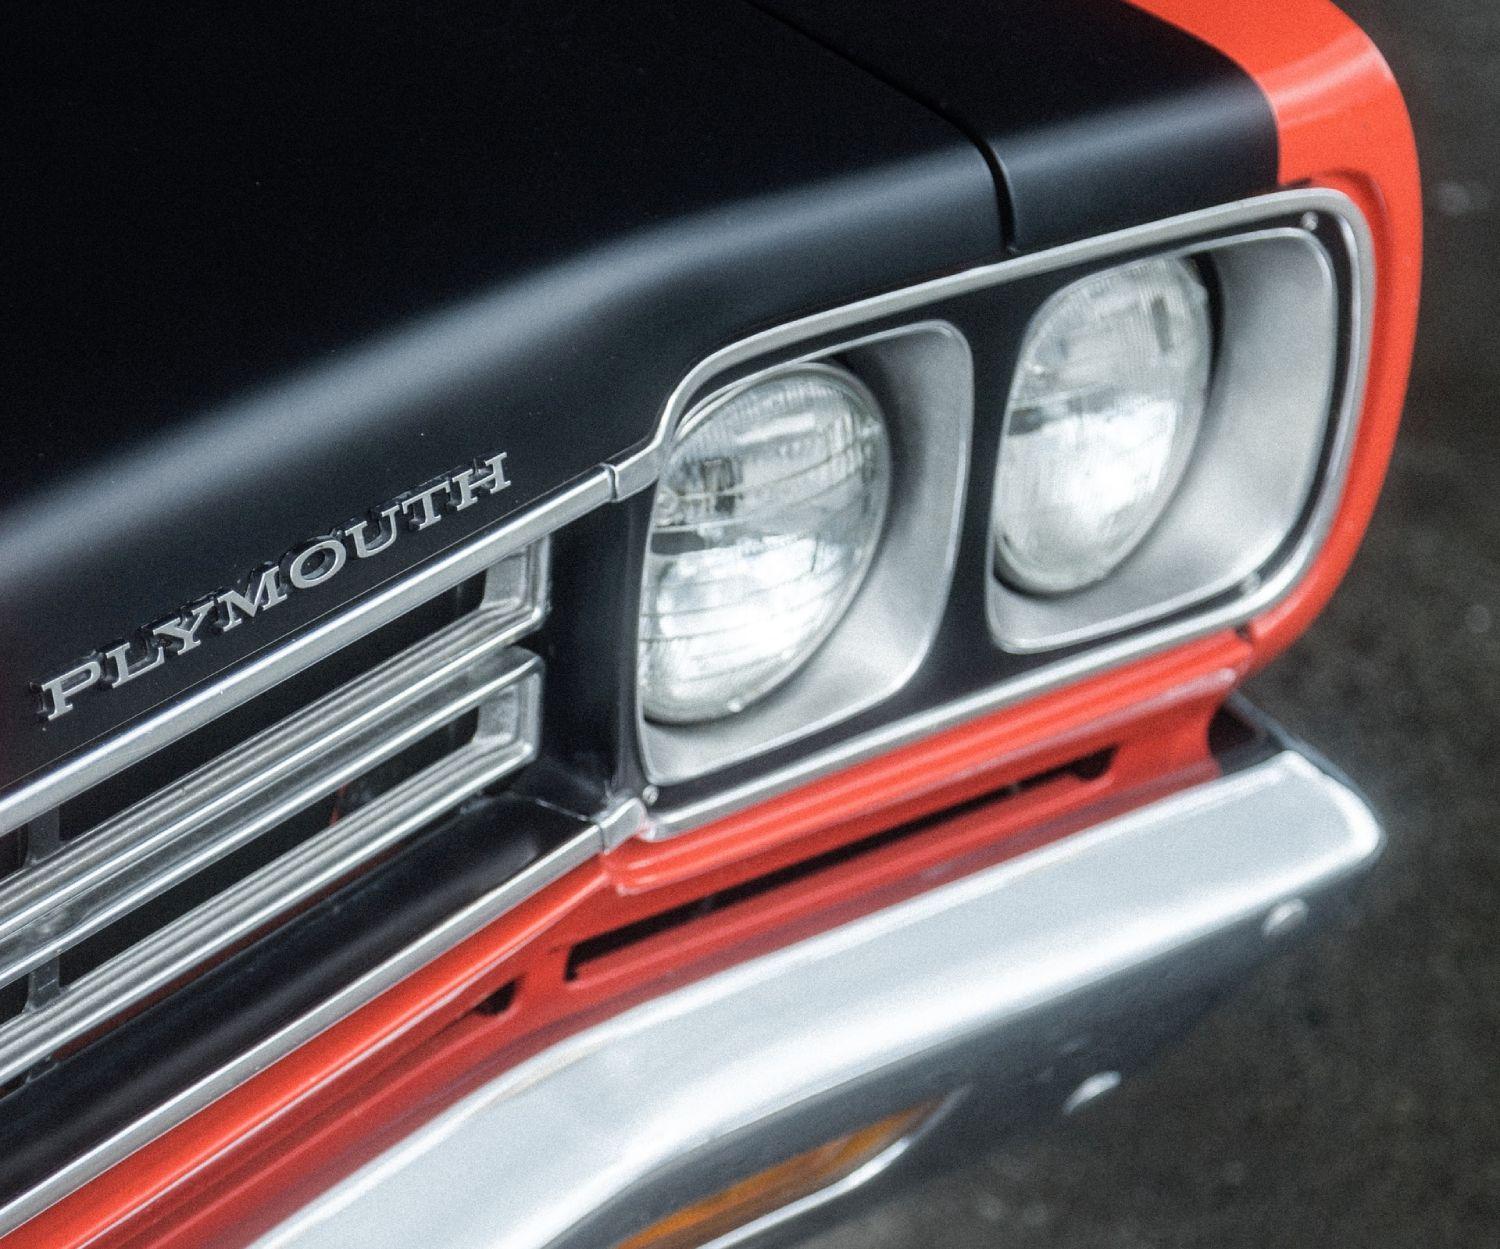 The iconic Plymouth logo graced the front of the Road Runner for over 10 years.